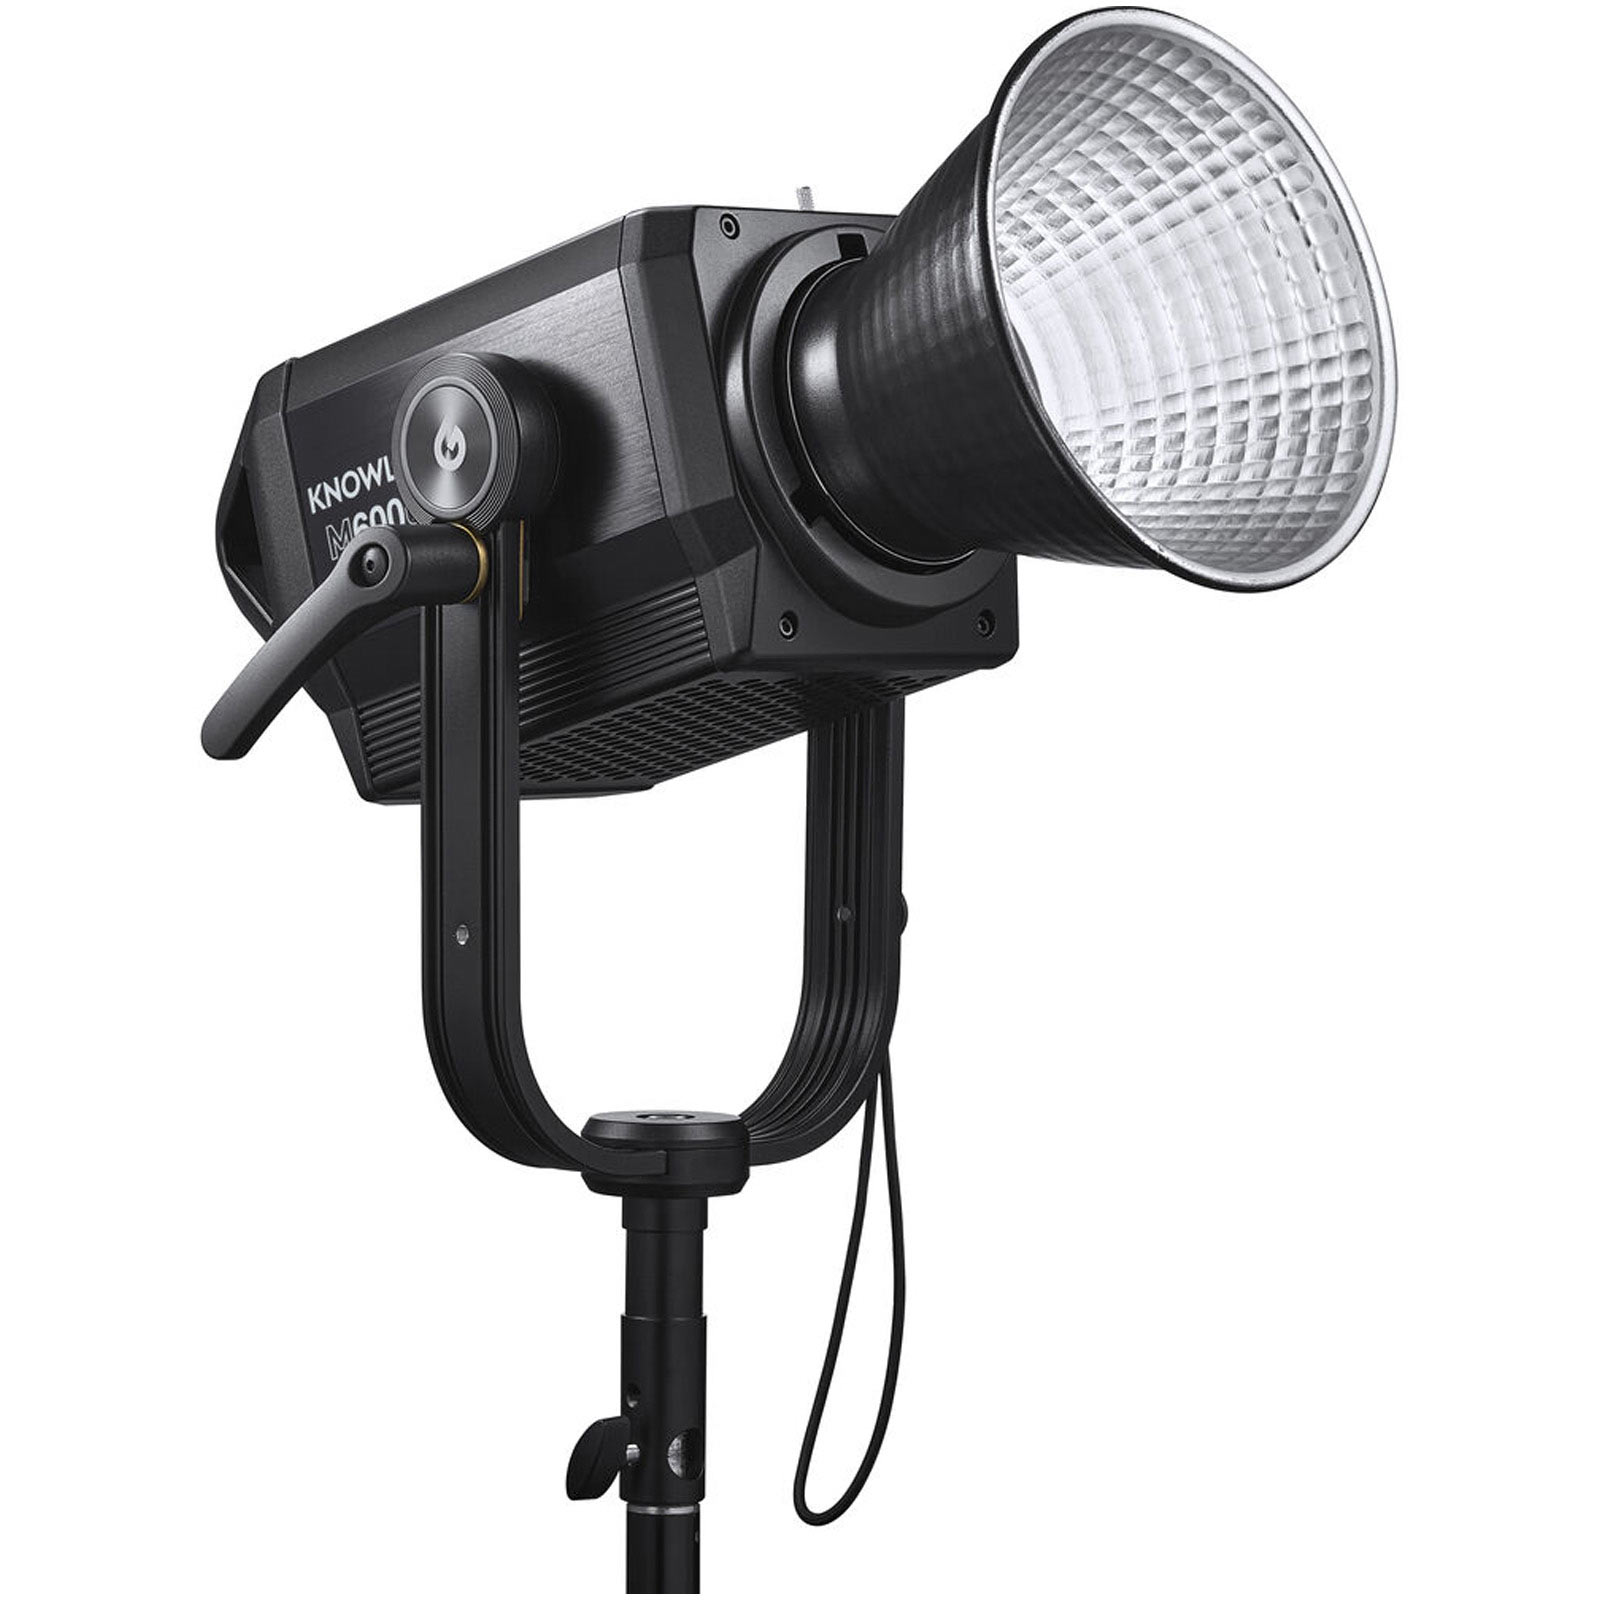 Image of Godox KNOWLED M600D Professional Day Light LED Light